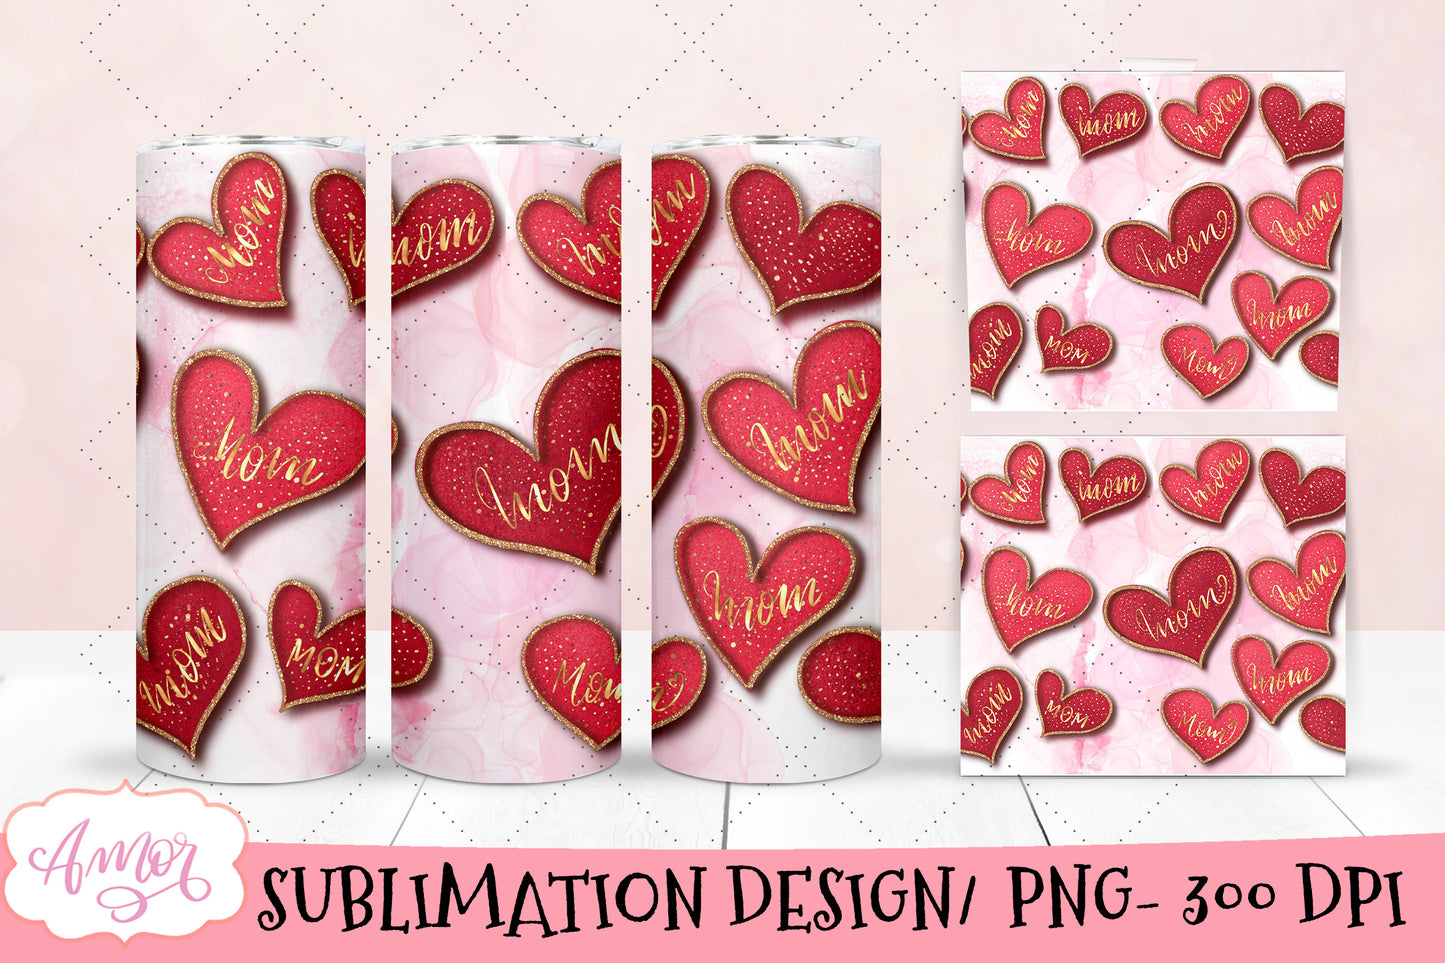 Mom Hearts Tumbler Wrap for Sublimation